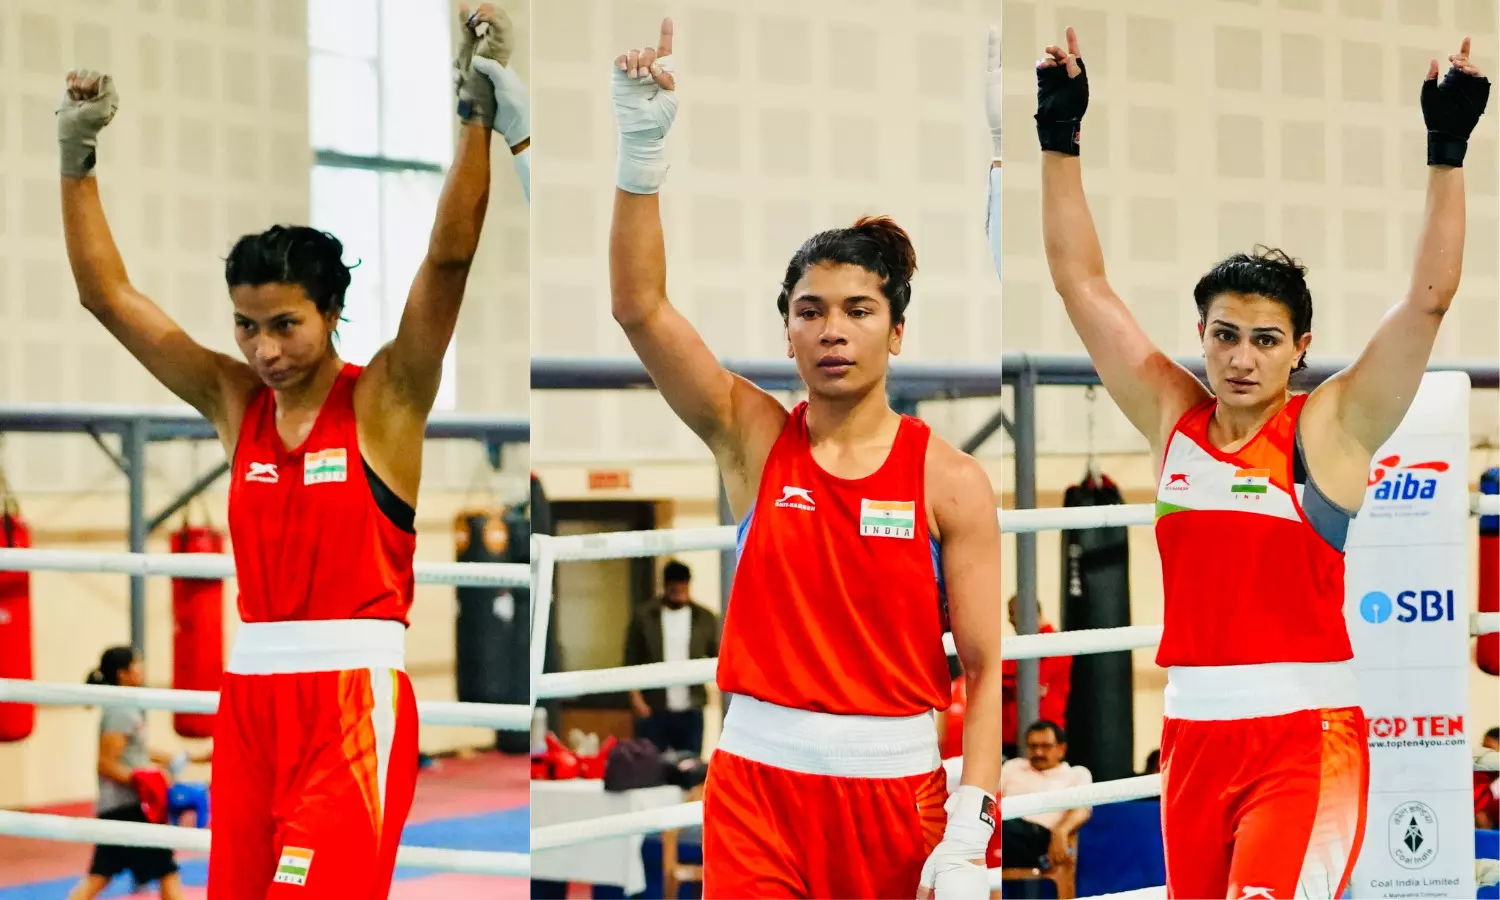 2023 Womens World Boxing Cships Preview, India squad, Schedule, Where to Watch, Live Stream